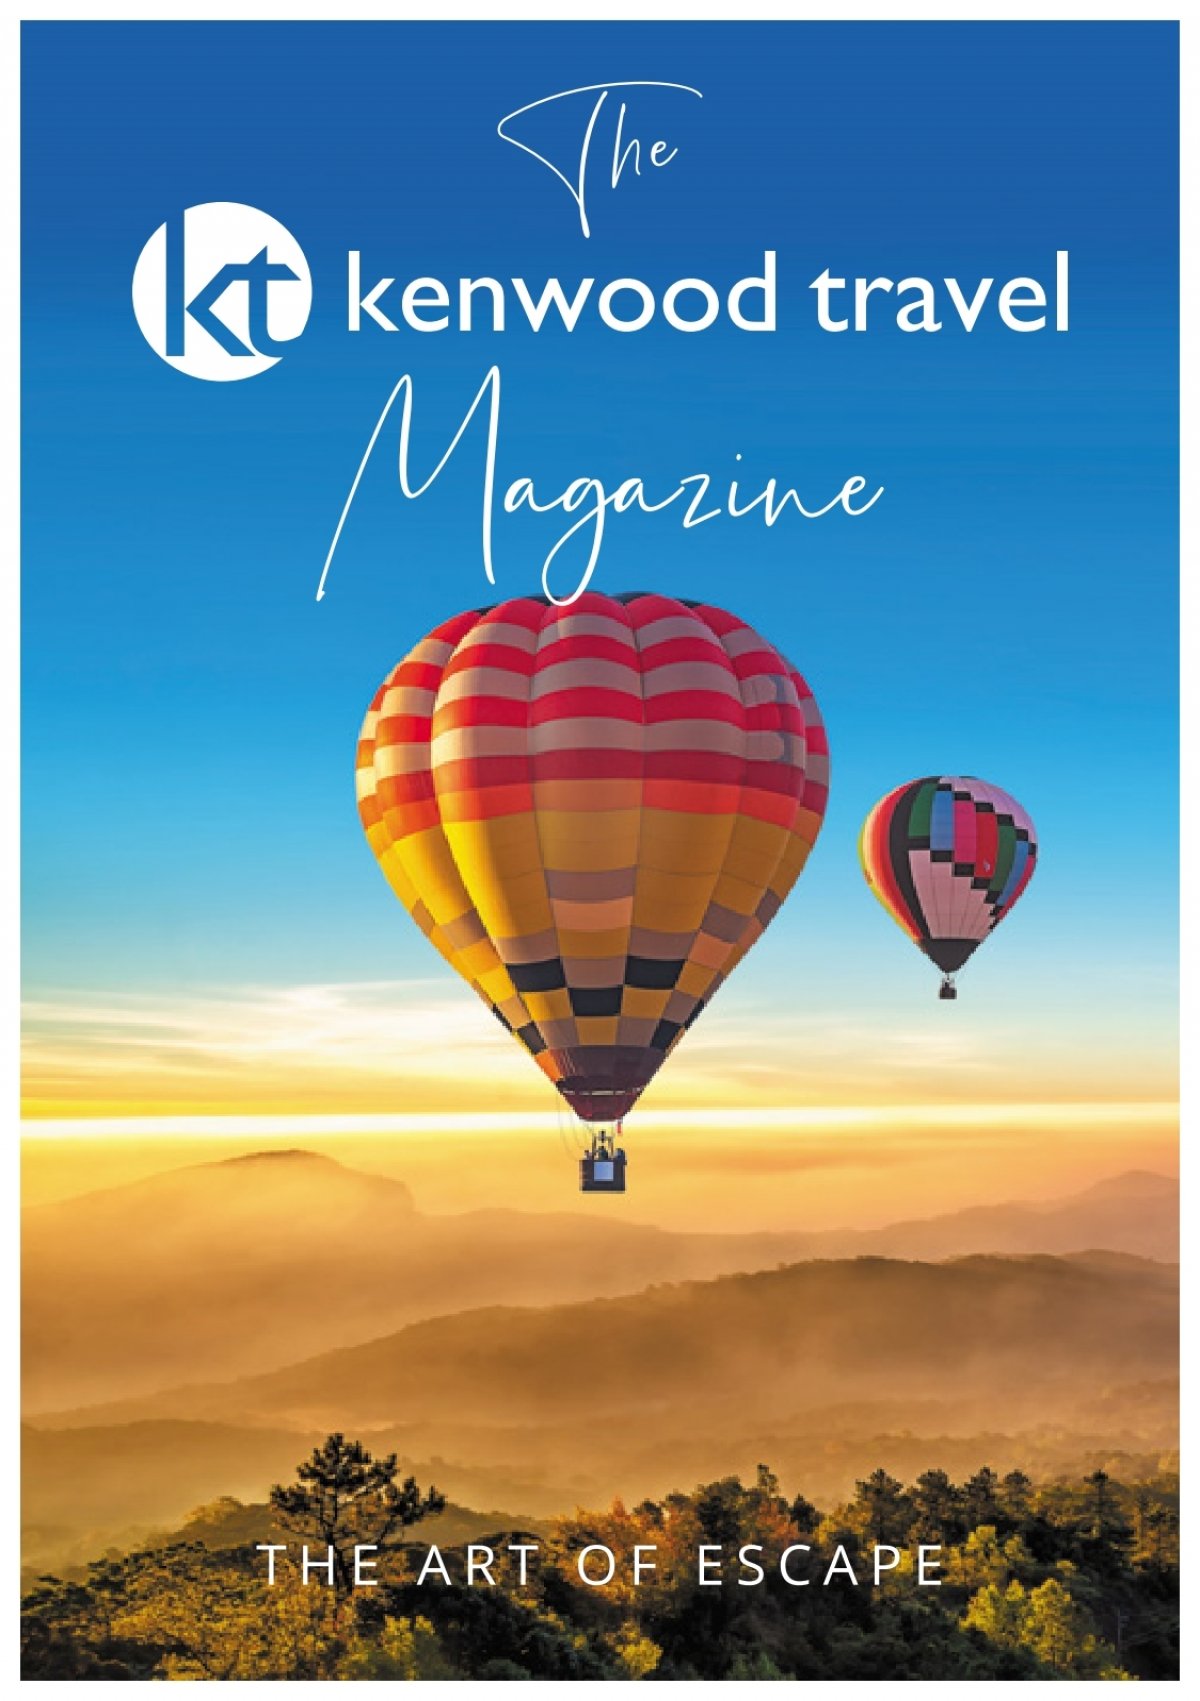 has kenwood travel gone bust today